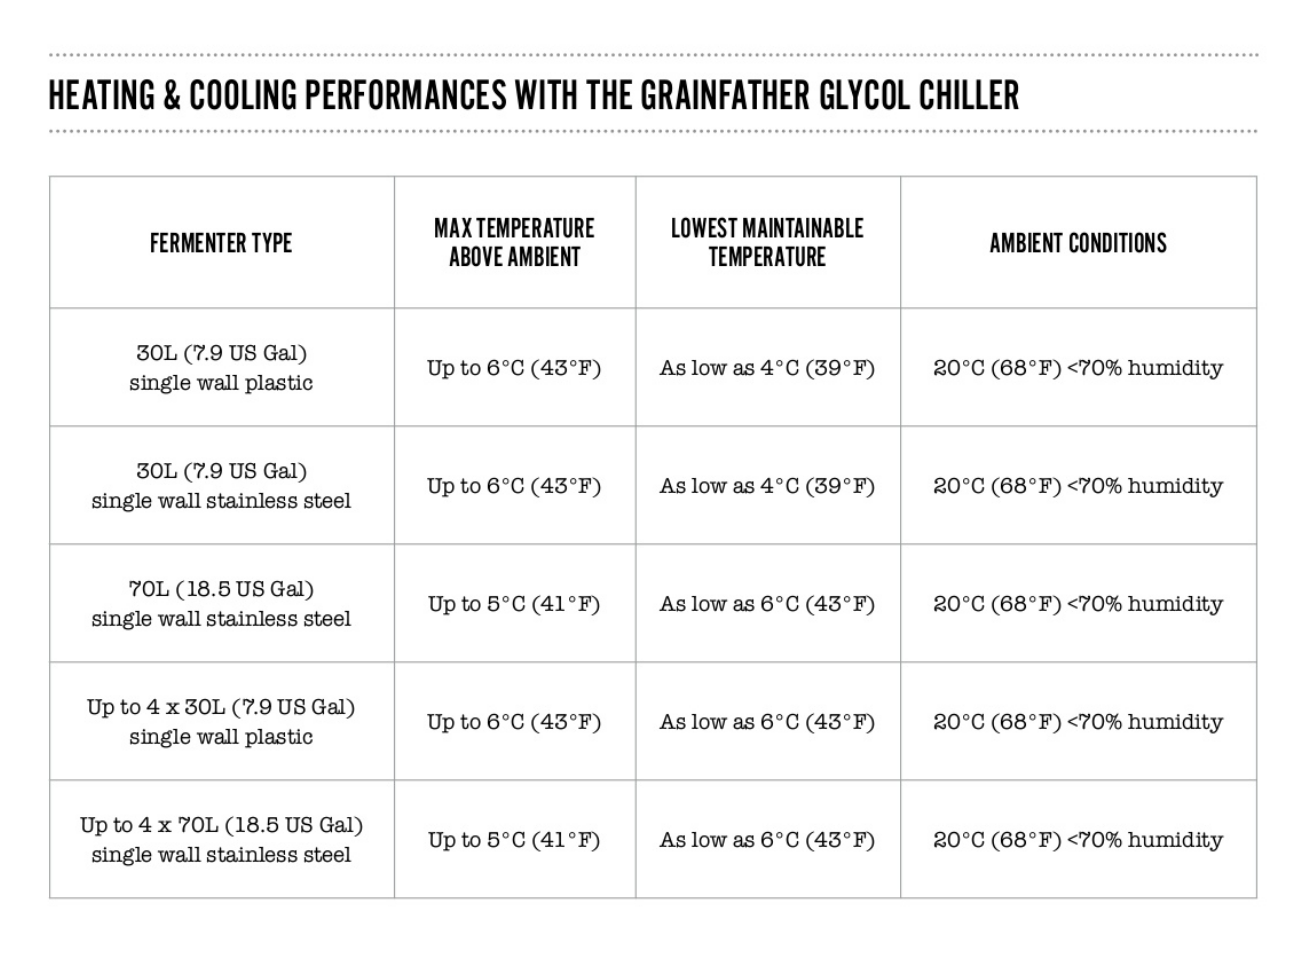 Heating___Cooling_Performances_with_the_GF_Glycol_Chiller.PNG